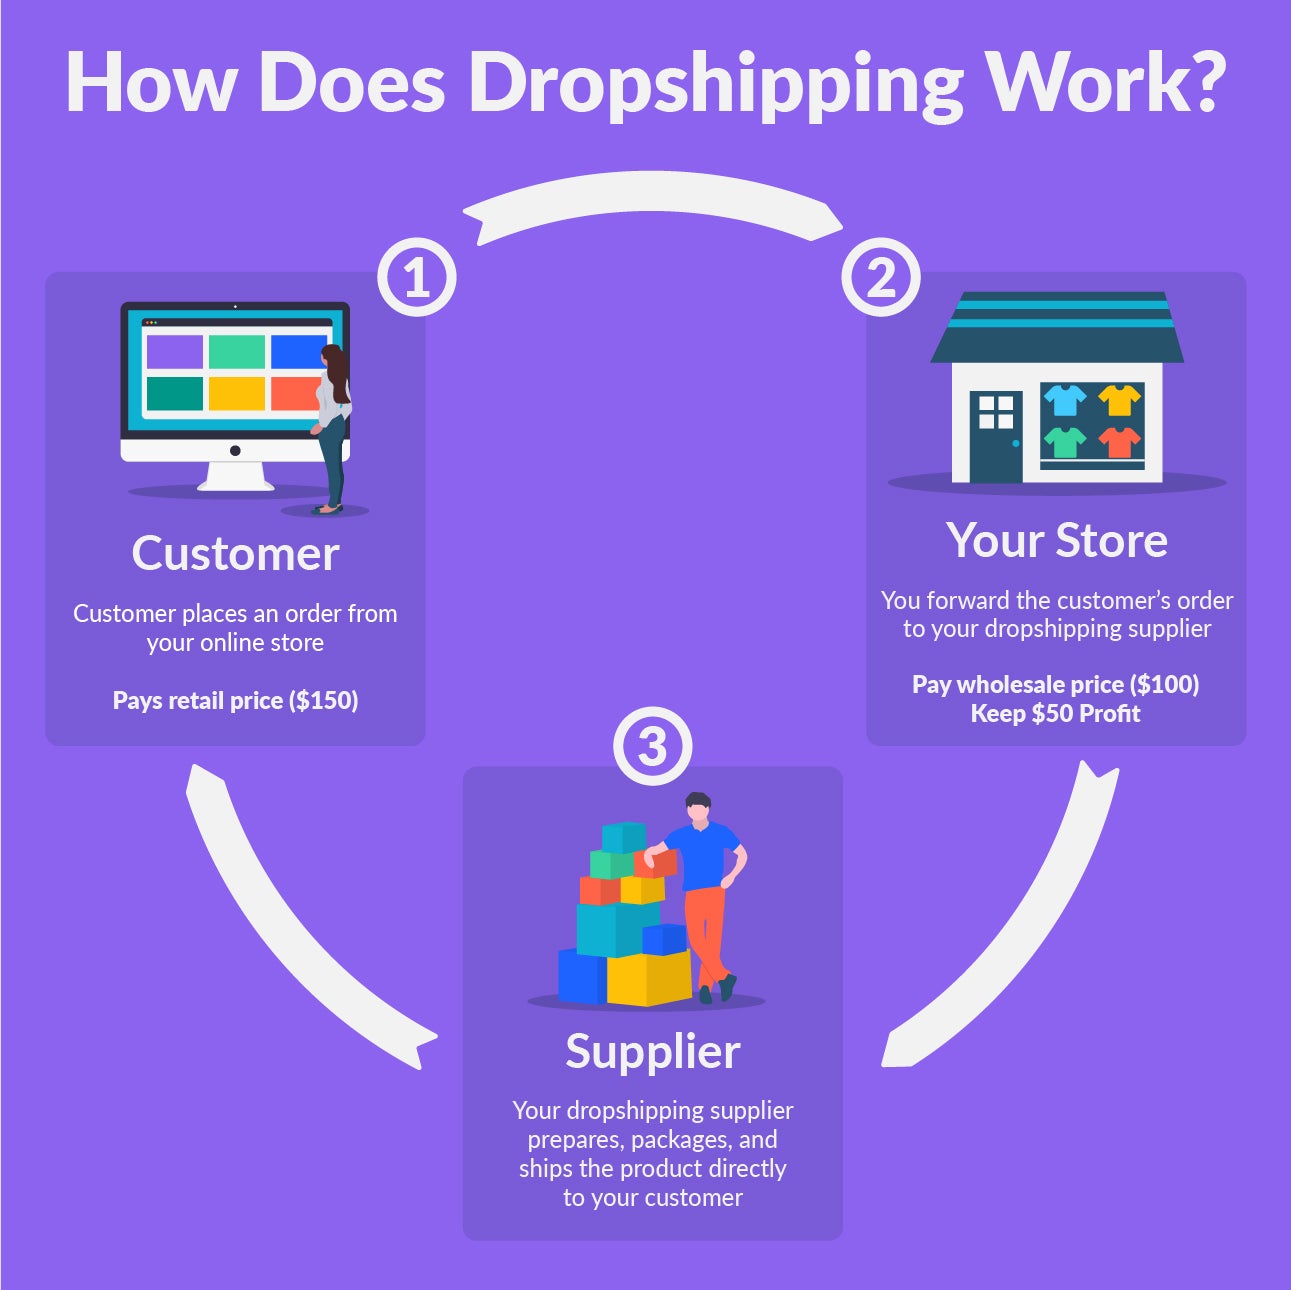 Dropship Suppliers - How to Find the Best One Online